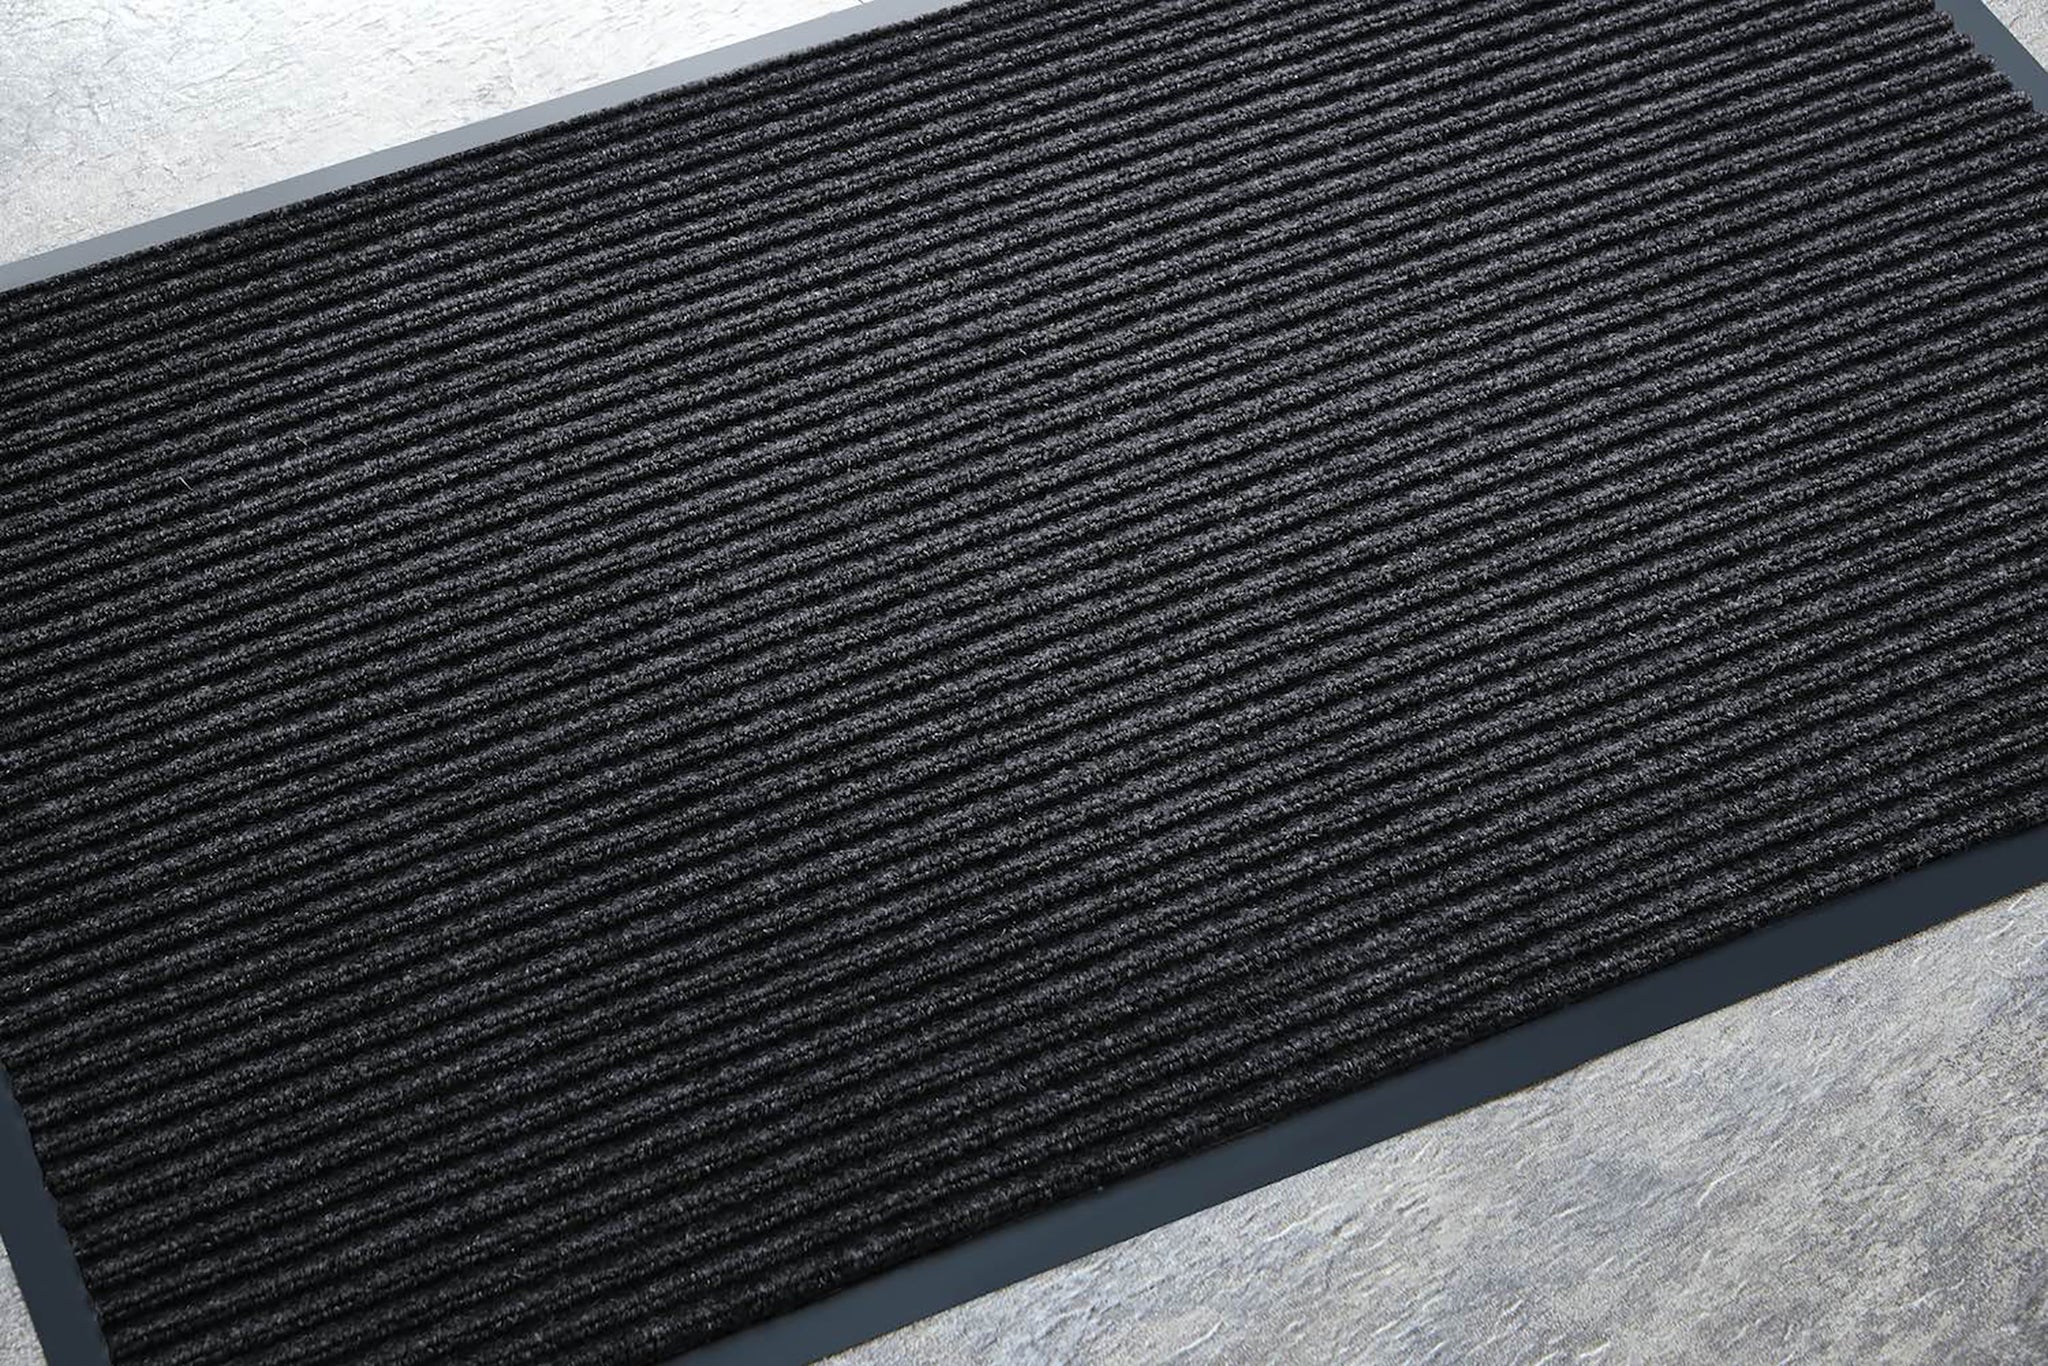 The Rug Hub Ribbed Non-Slip Indoor Outdoor Mat